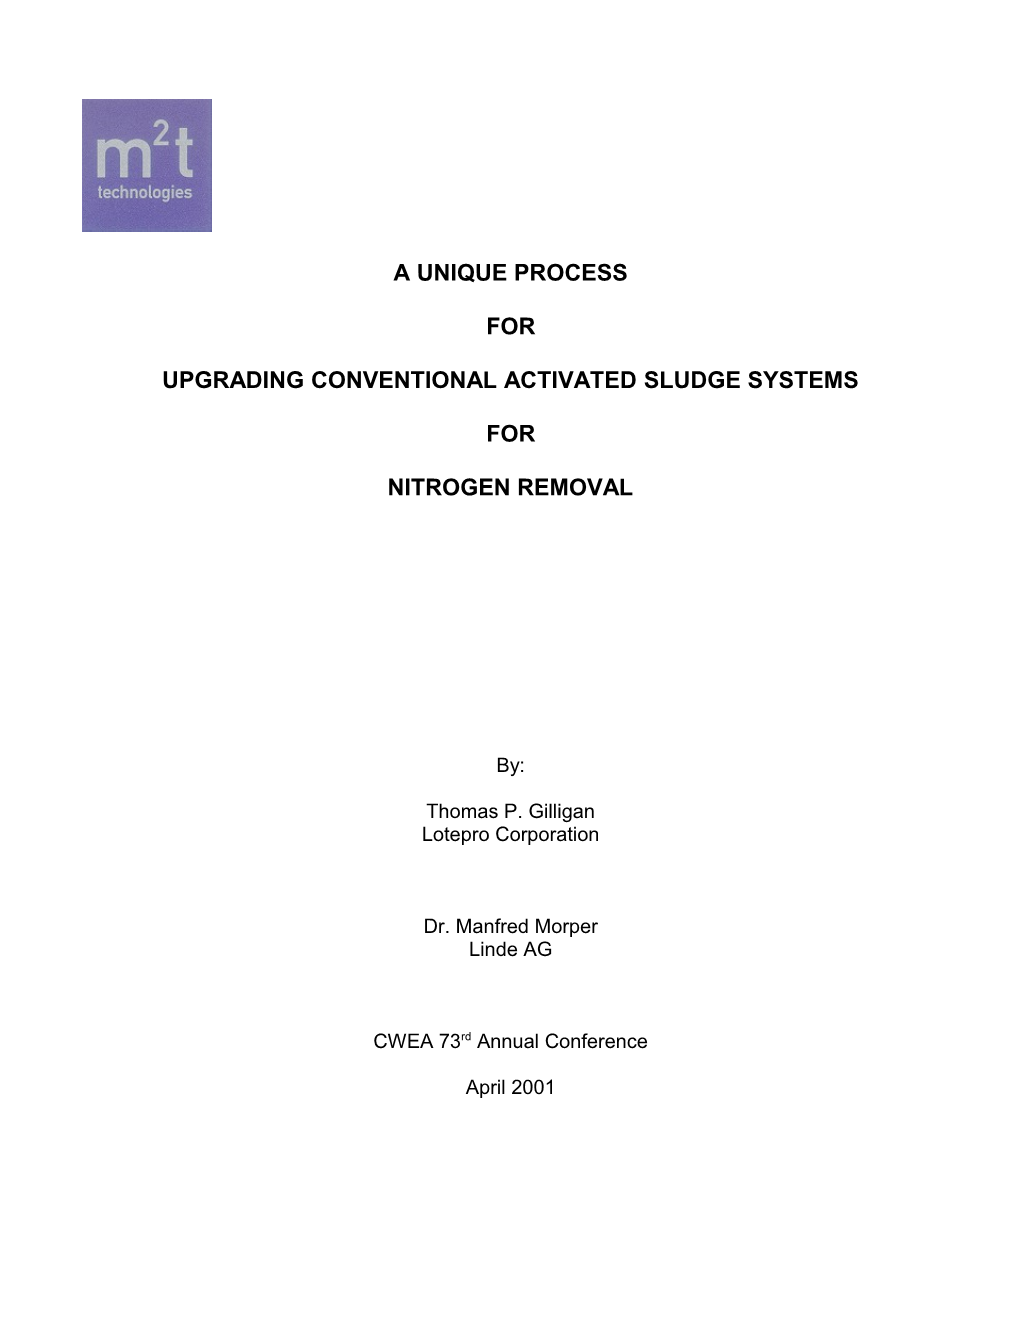 Upgrading Conventional Activated Sludge Systems